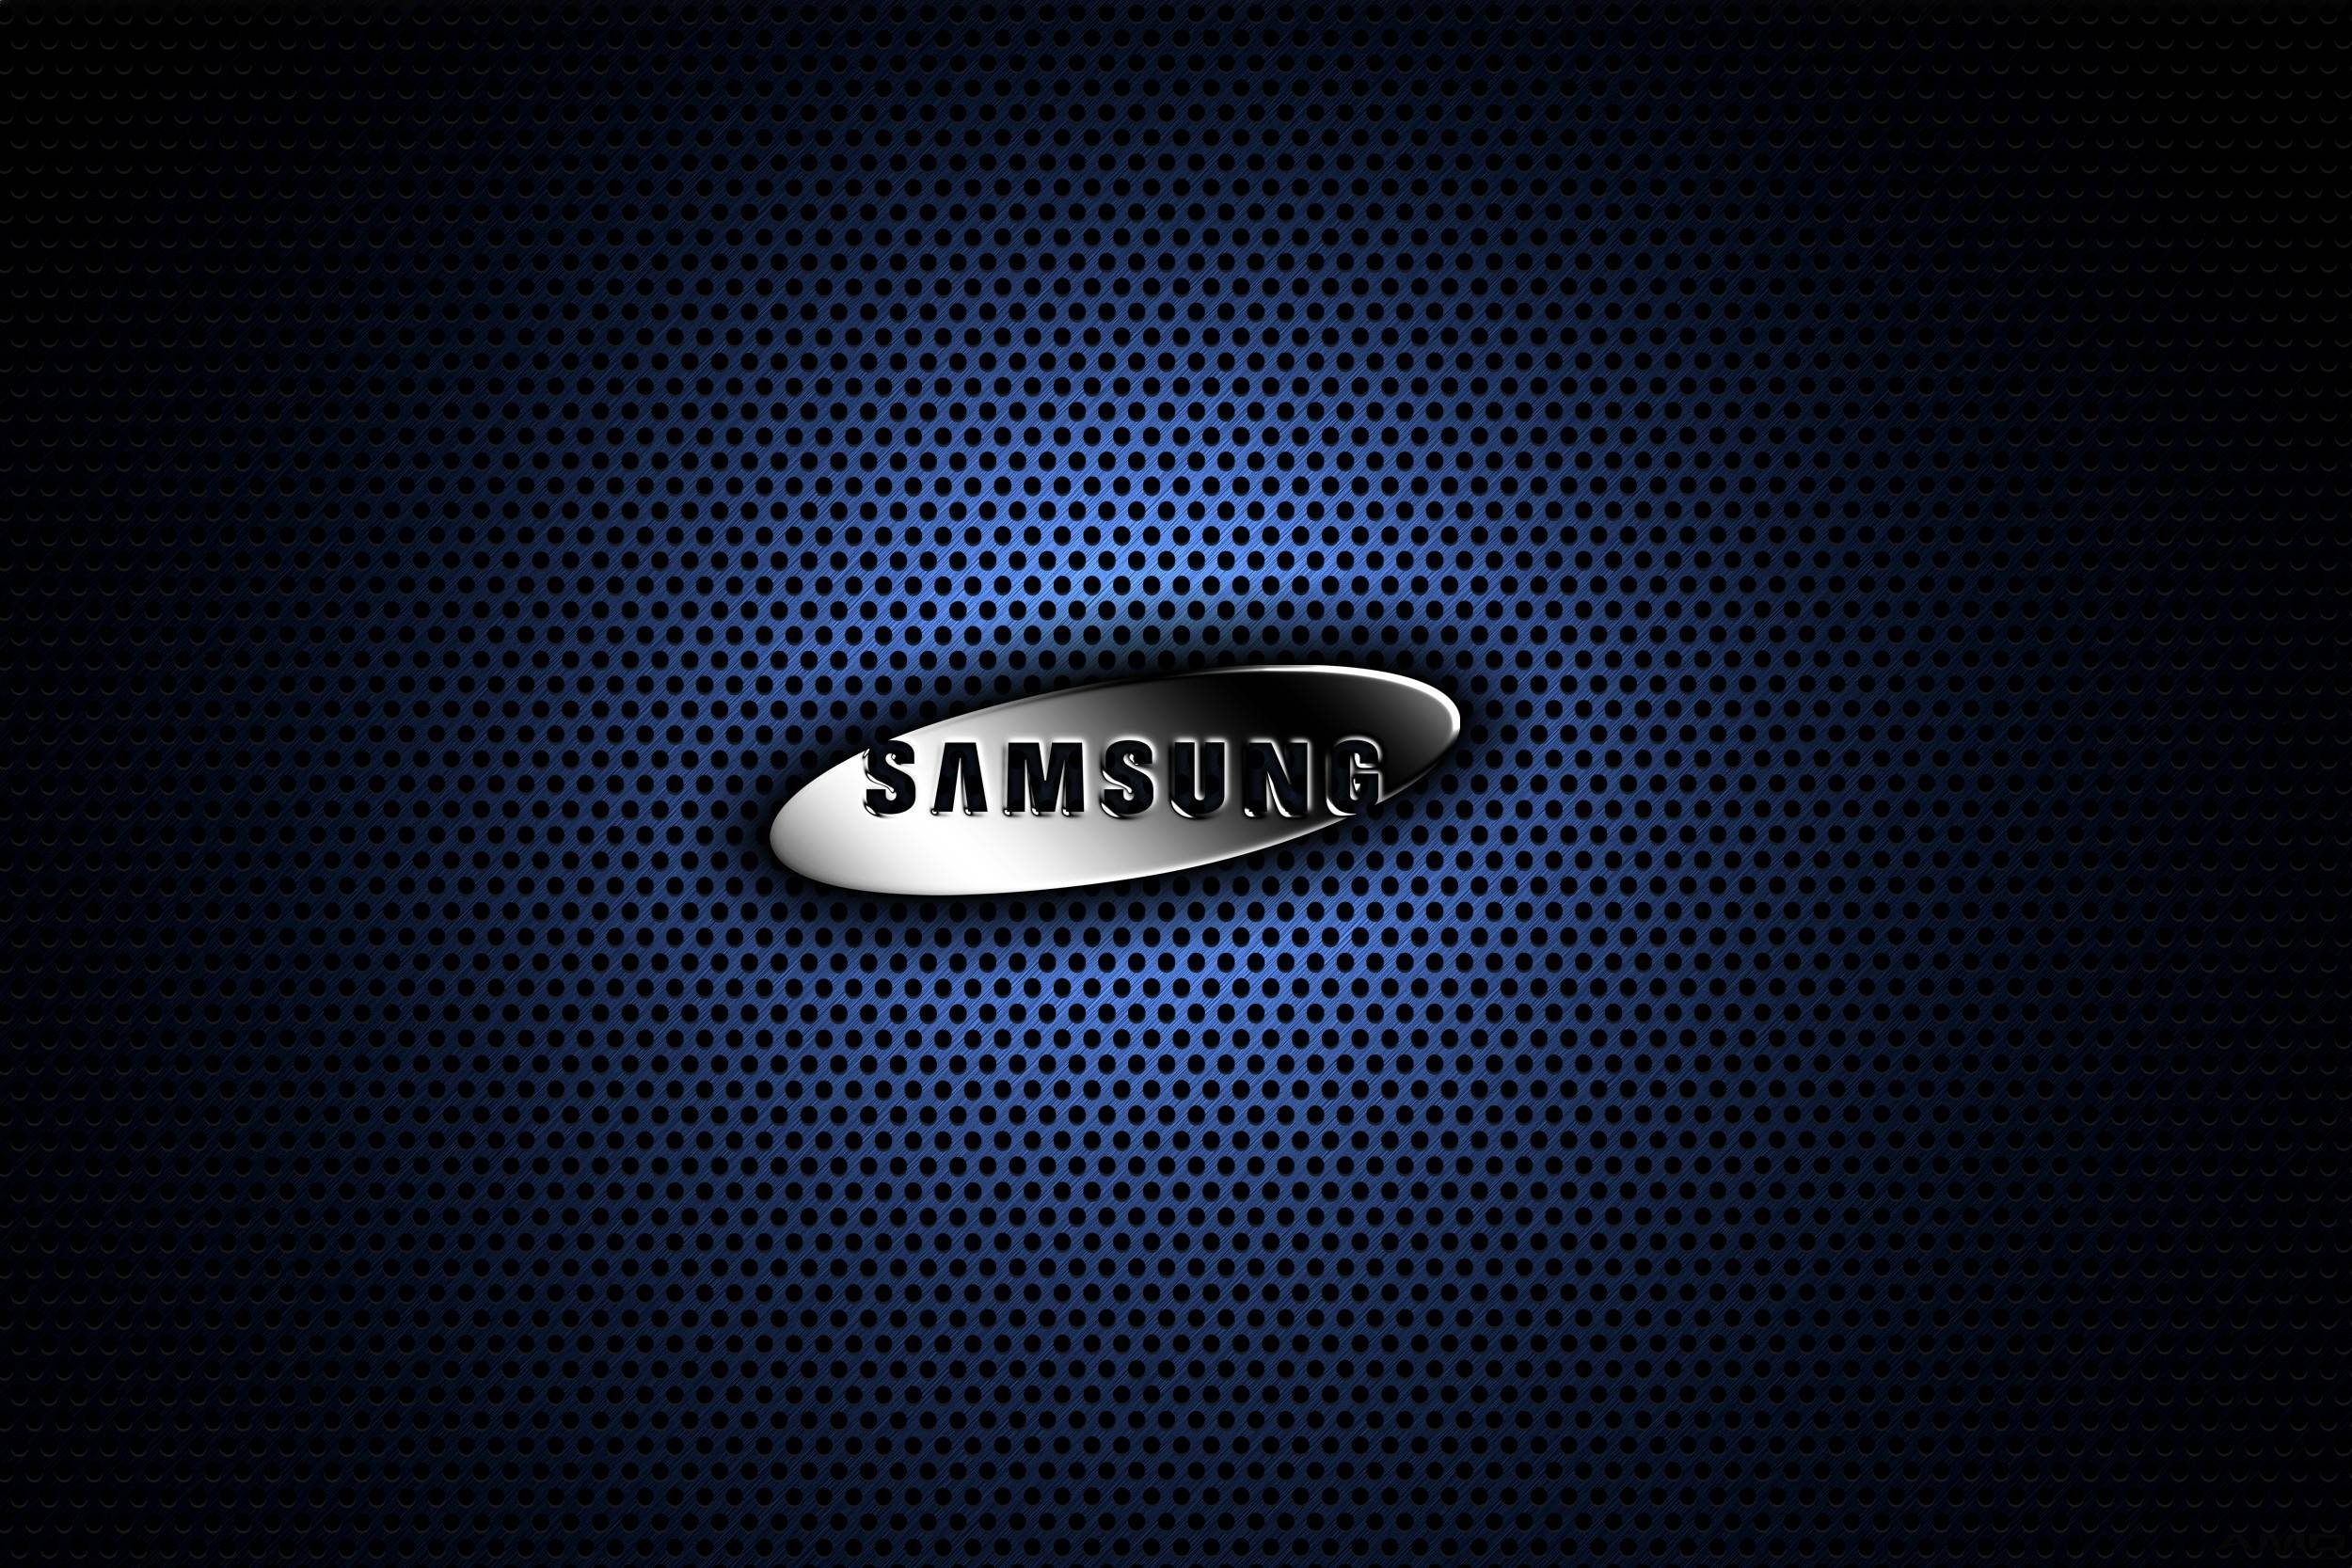 Samsung: The 8th highest global brand value, A company originally founded as a grocery trading store by Lee Byung-Chull. 2500x1670 HD Wallpaper.